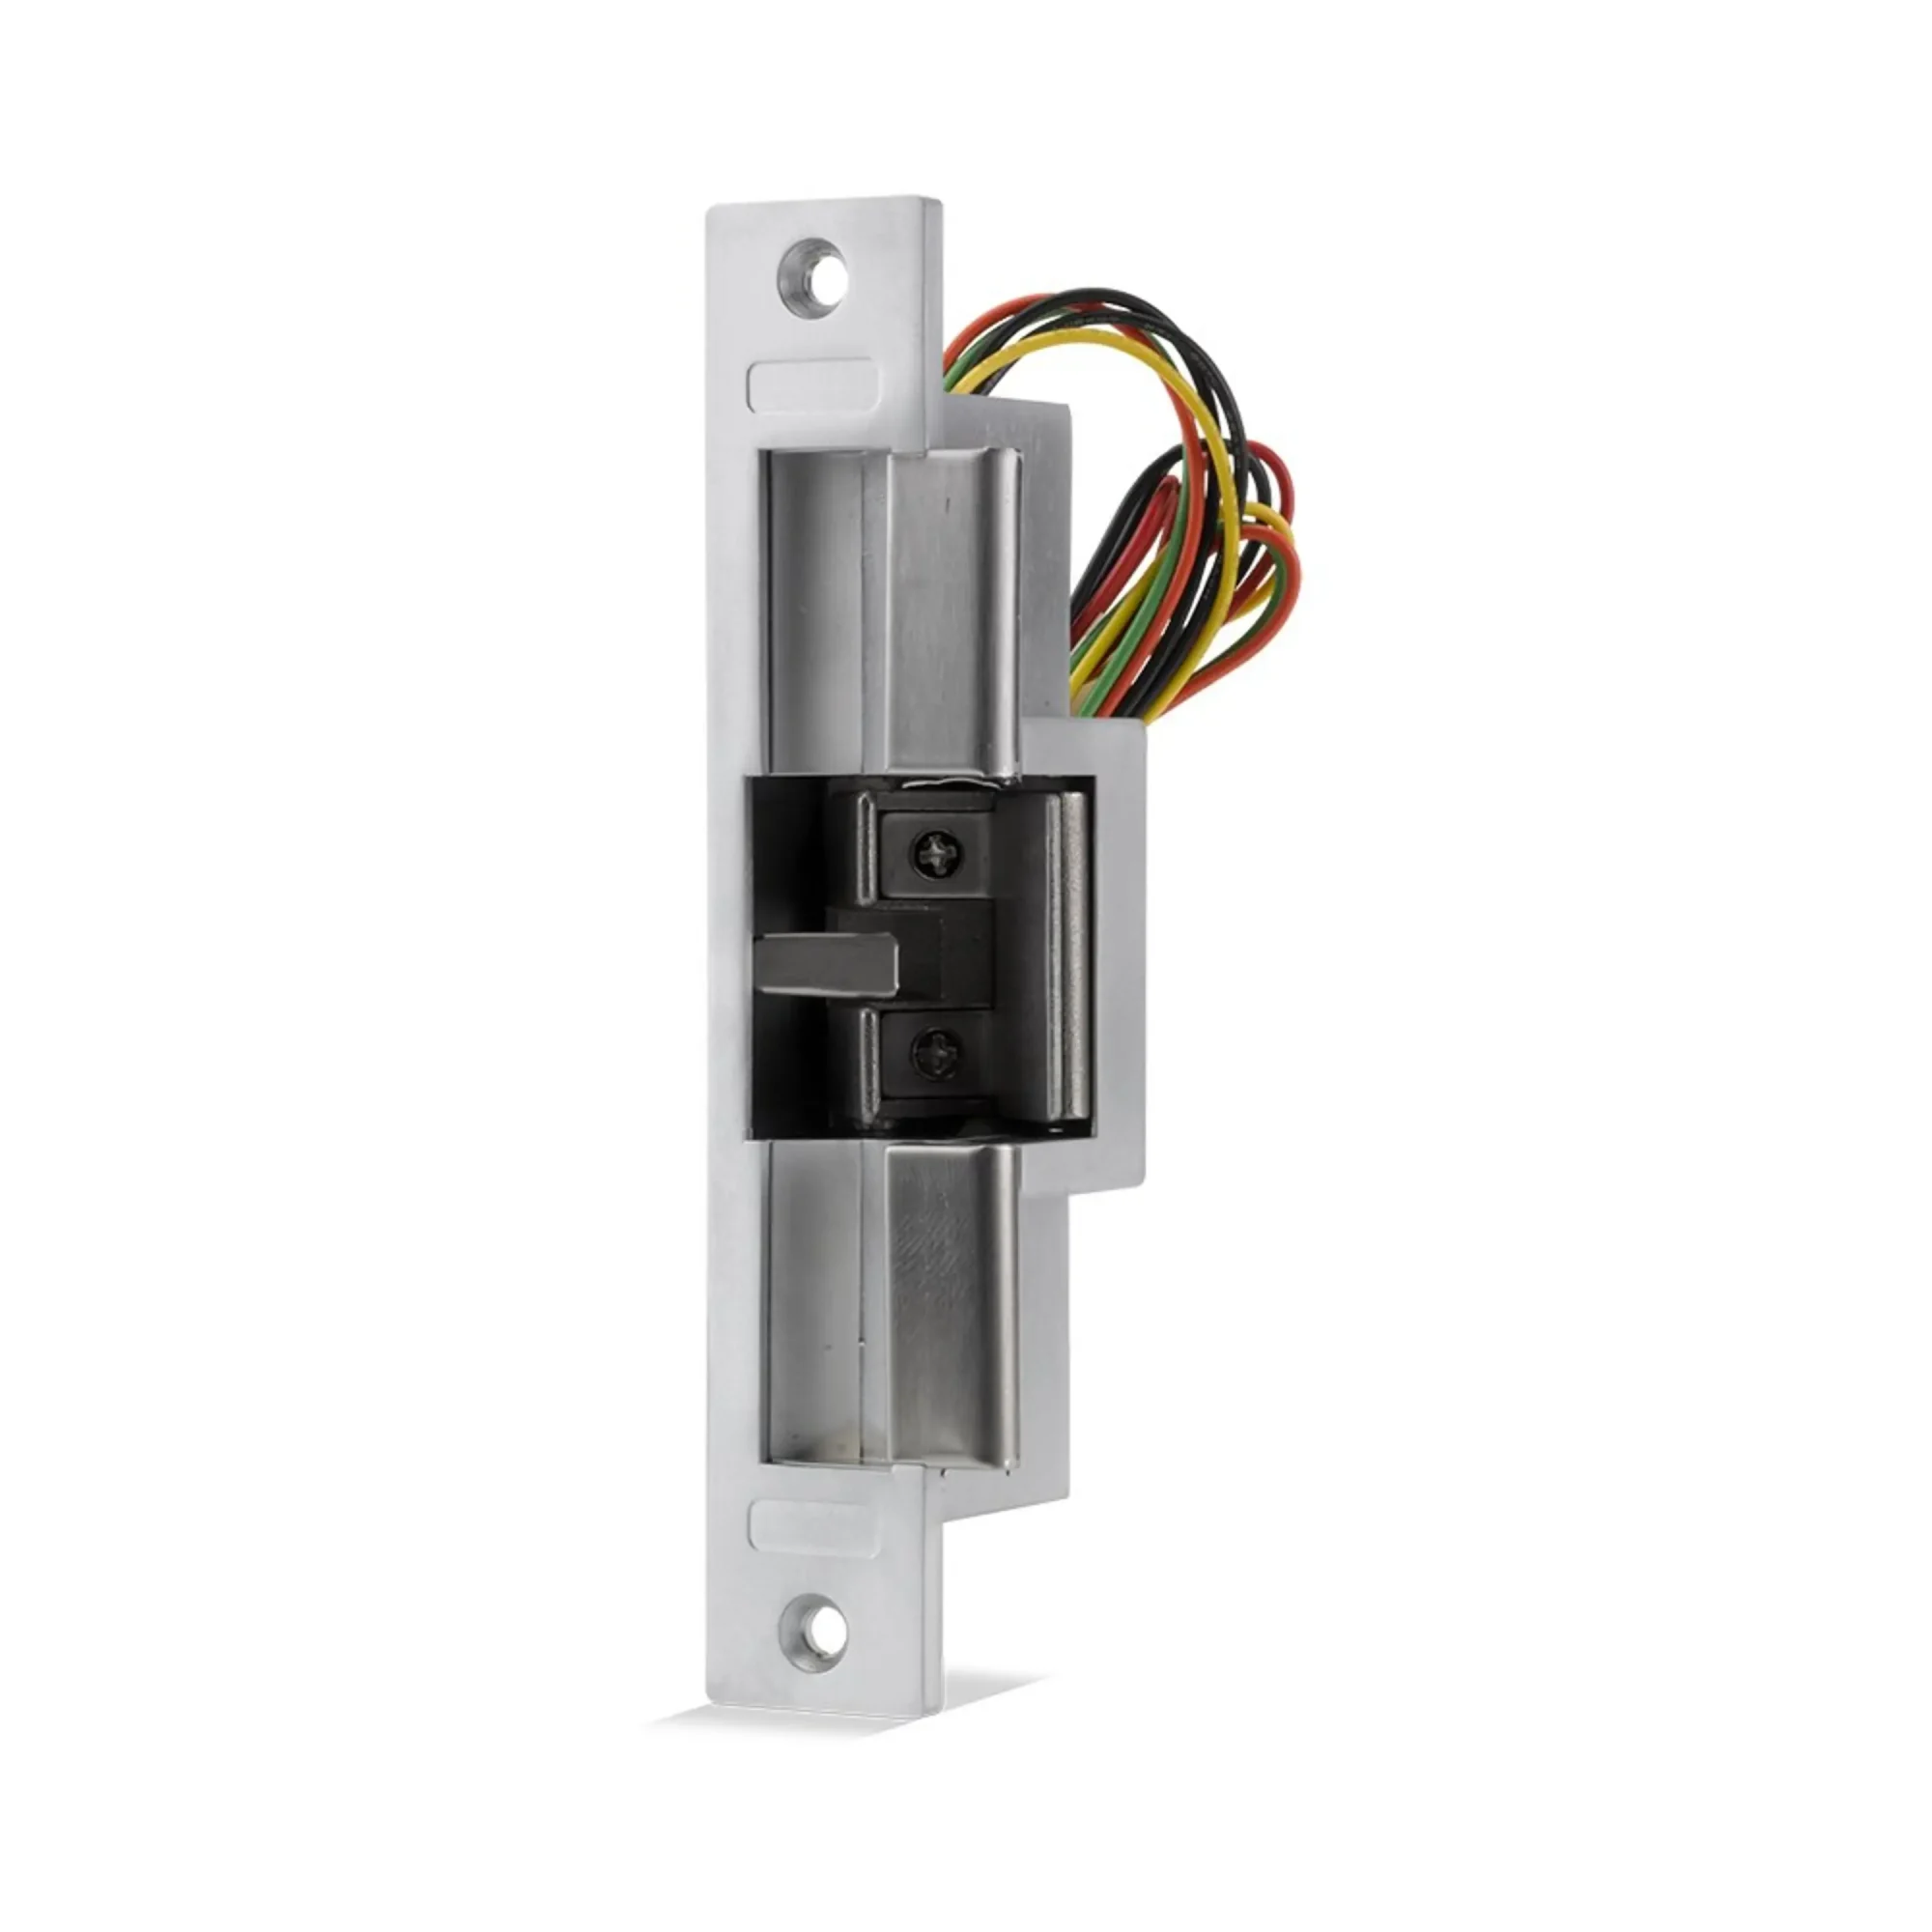 12V DC heavy-duty deadbolt release with door monitoring switch